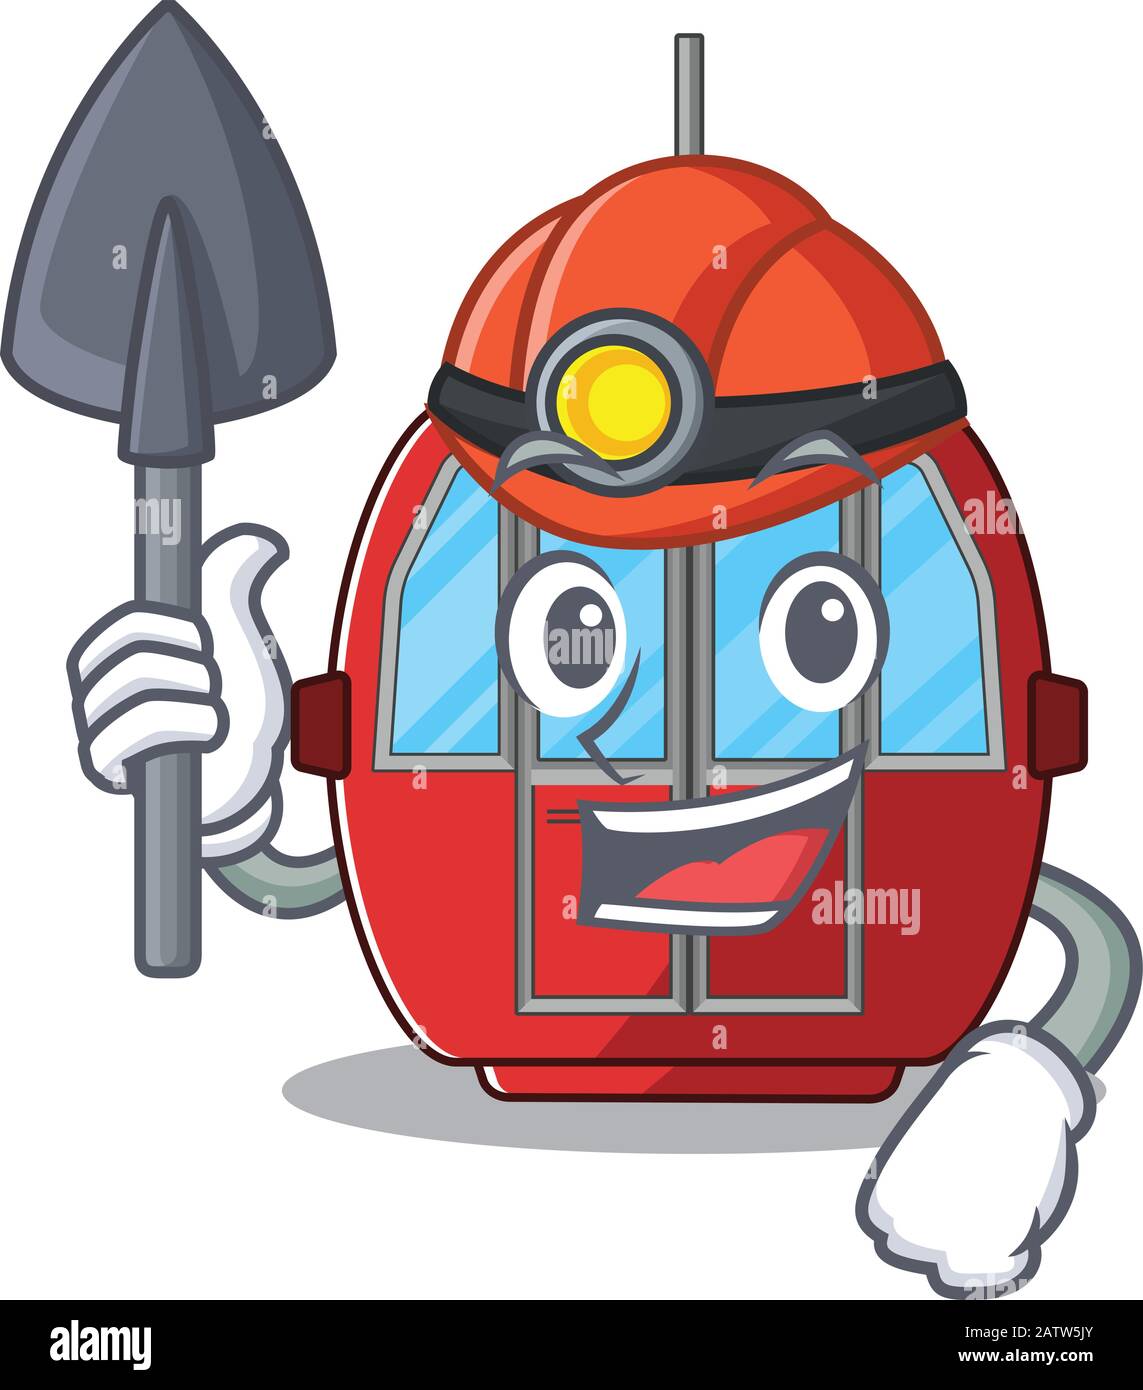 Cool clever Miner ropeway cartoon character design Stock Vector Image ...